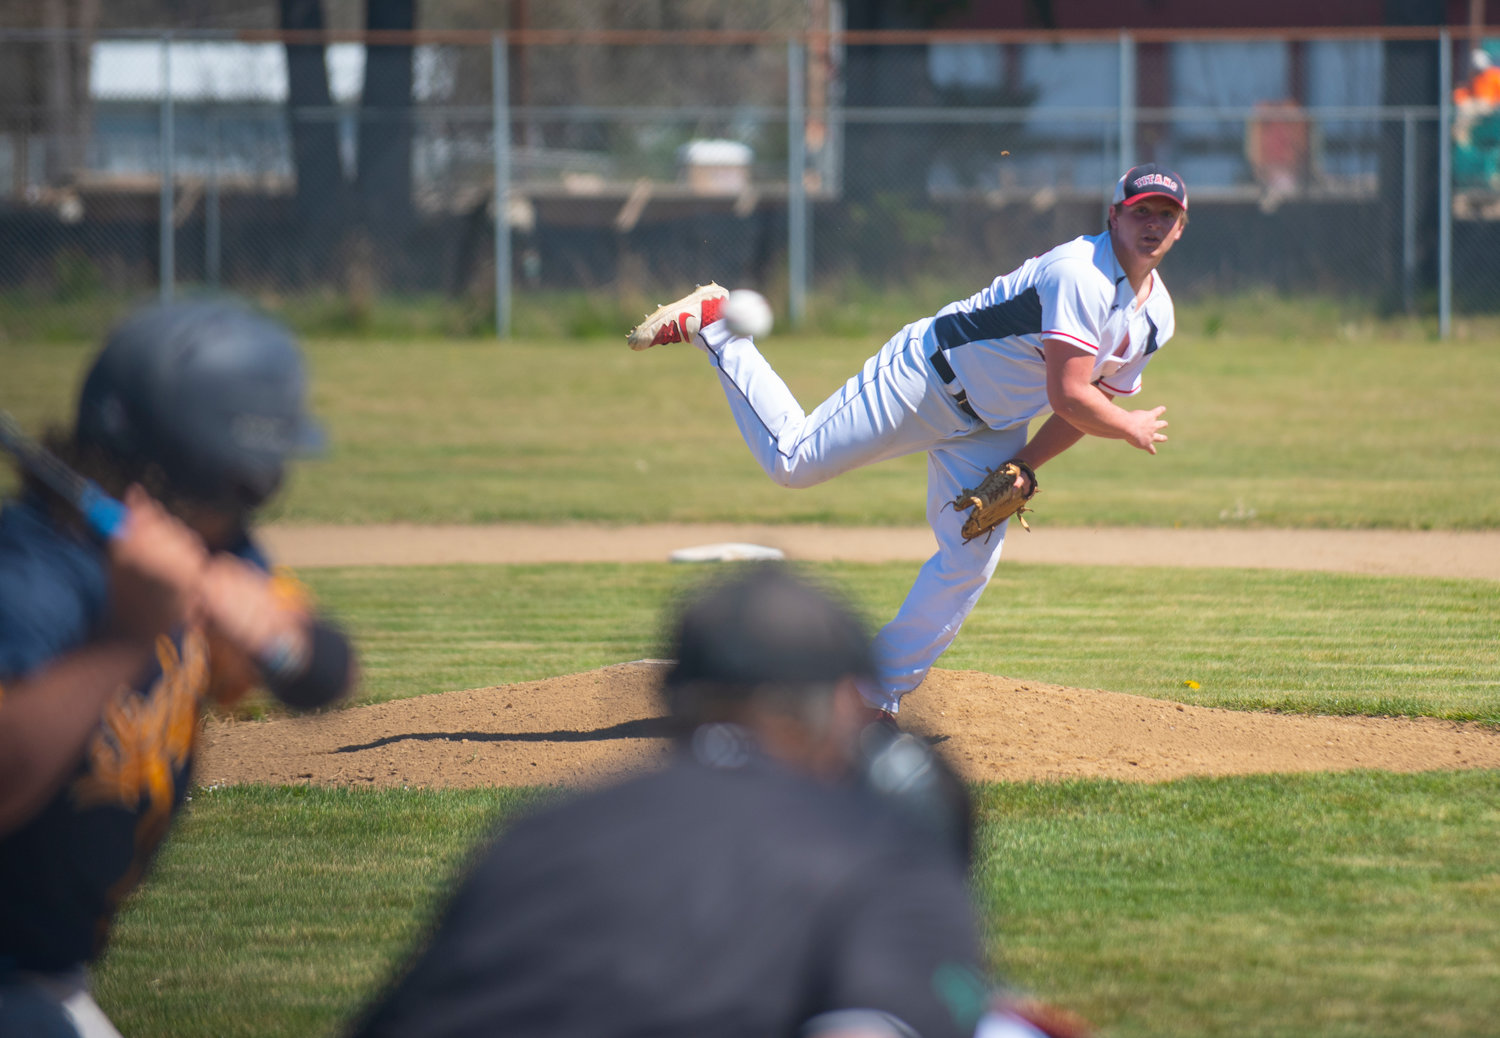 PWV sophomore pitcher Garrett Keeton delivers a pitch to a Forks batter on Friday in Pe Ell.